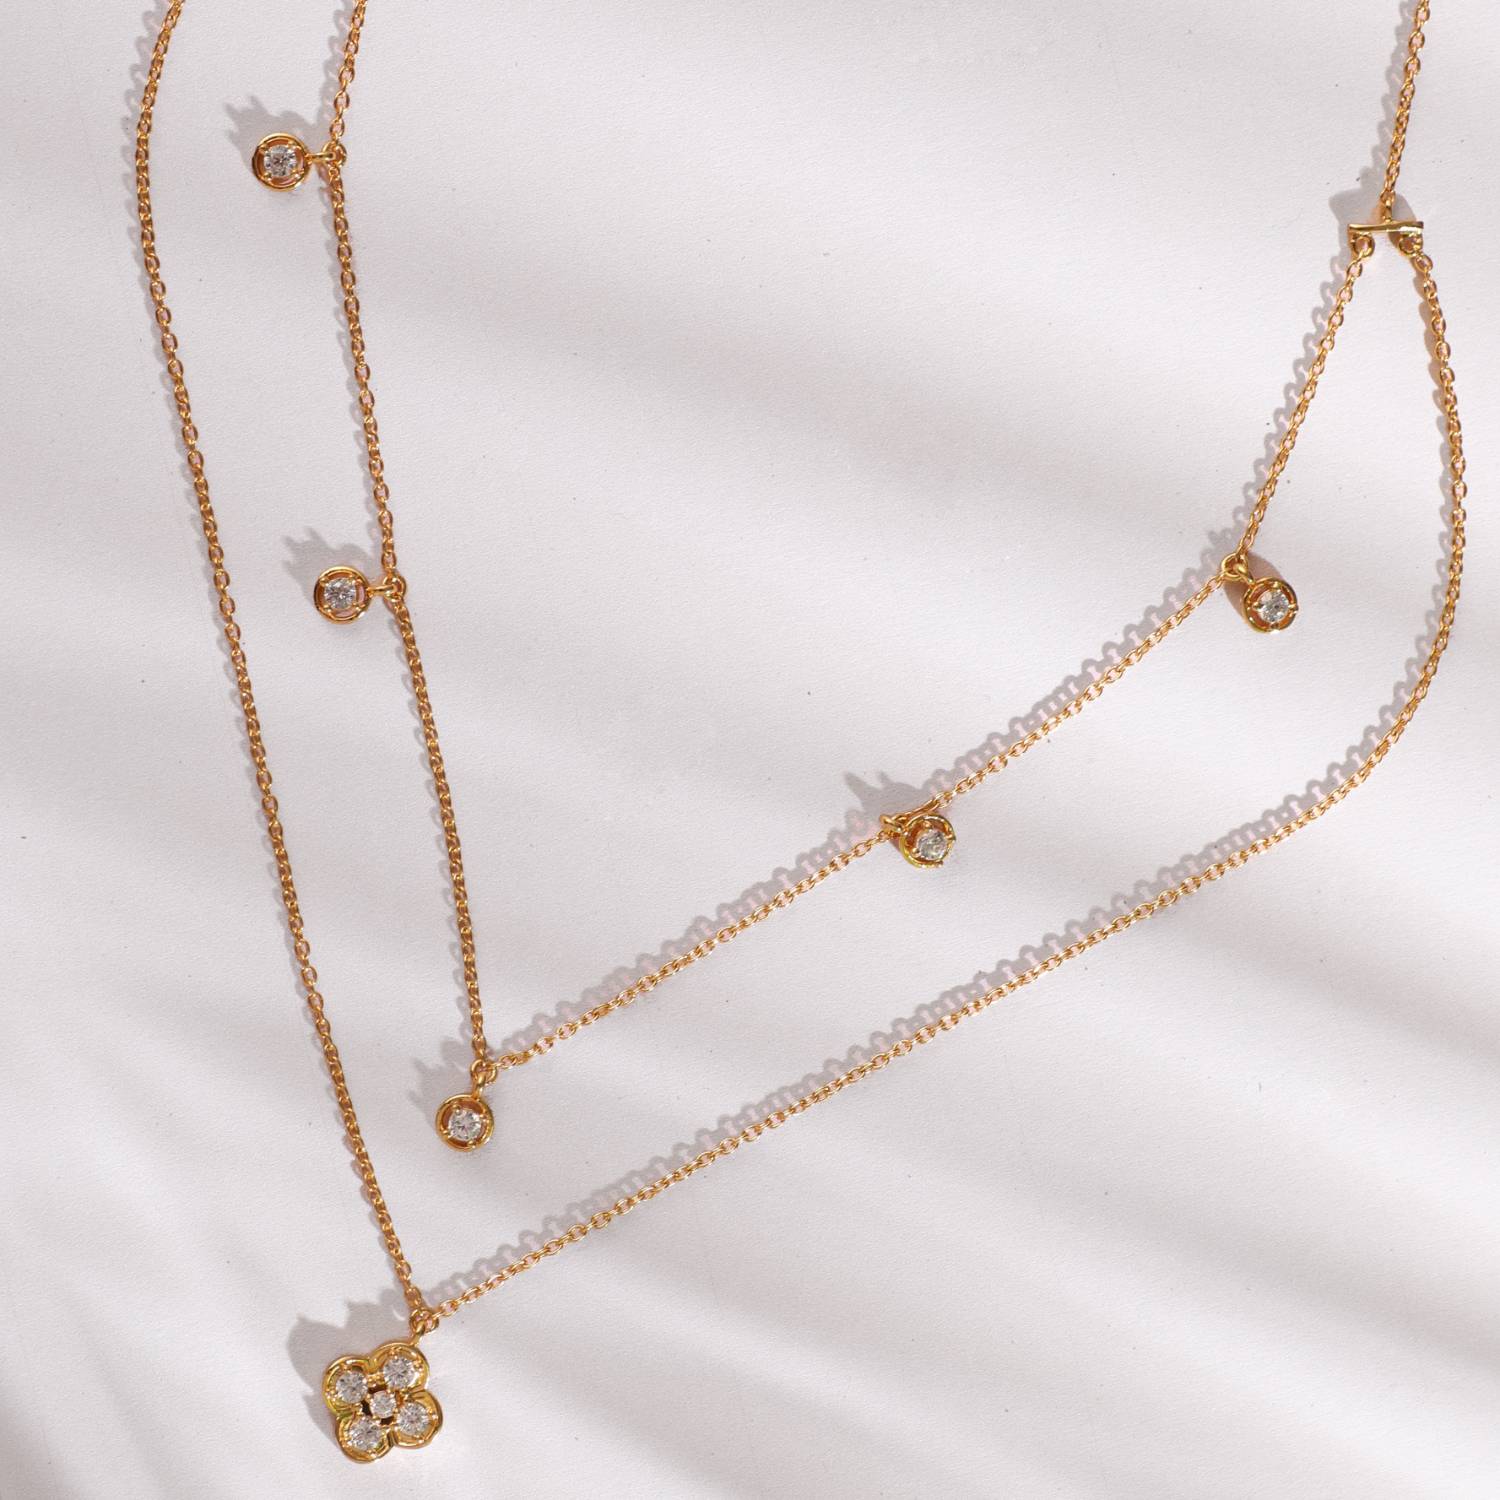 Double Layer CZ Charm Dainty Silver Necklace